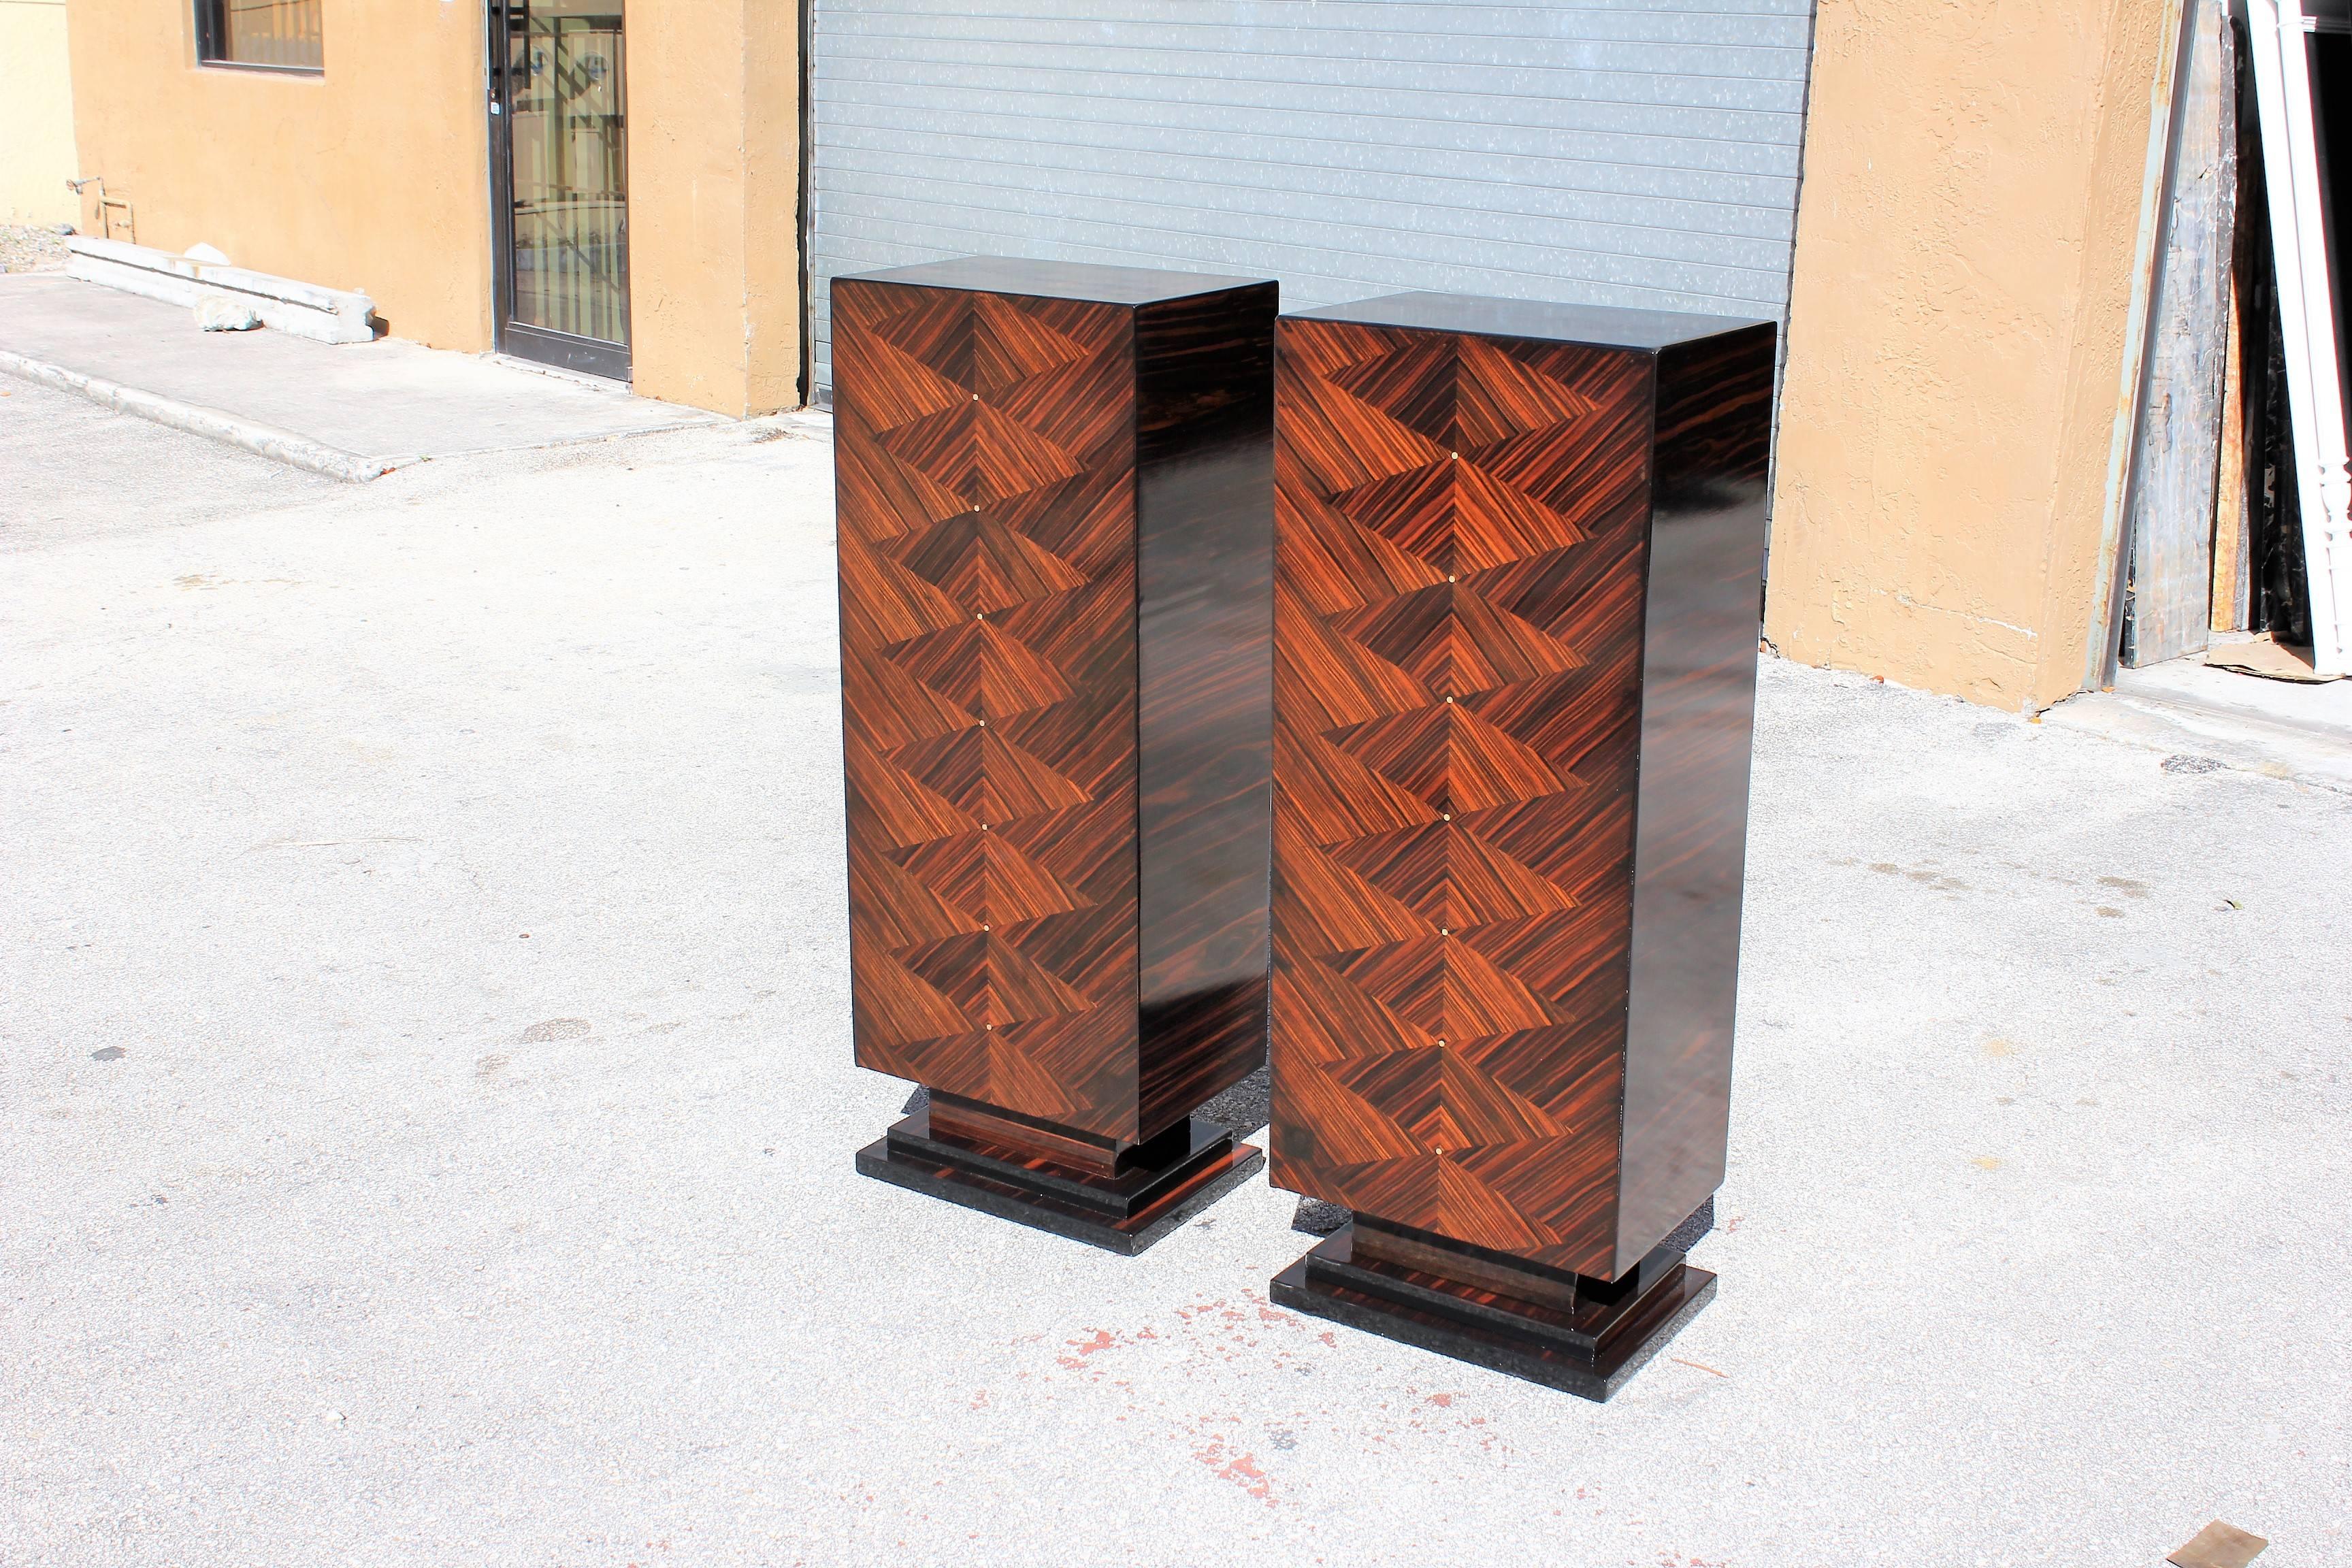 Mother-of-Pearl Pair of French Art Deco Exotic Macassar Ebony Pedestals, M-O-P Accents, 1940s